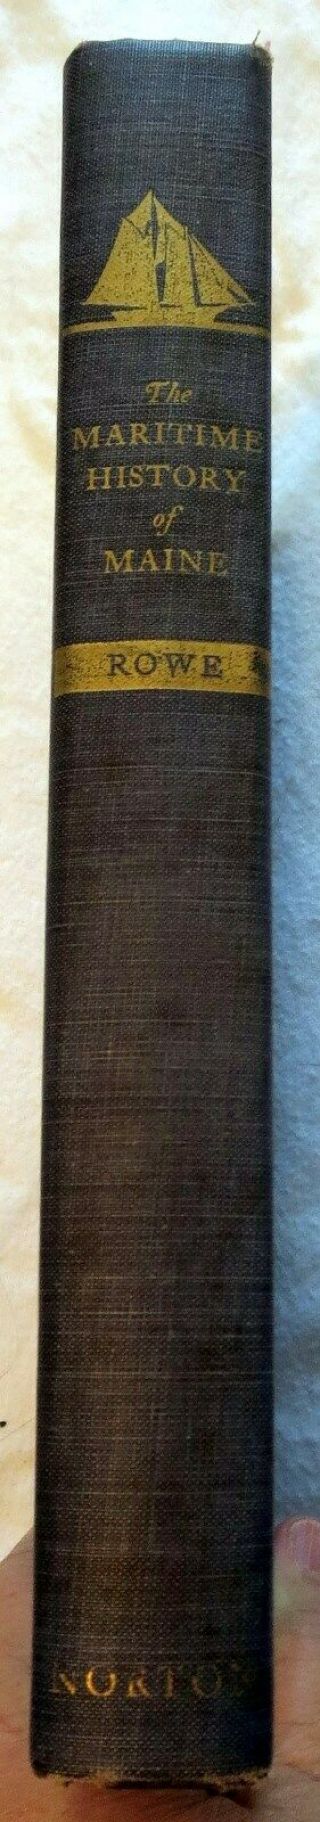 1948 The Maritime History Of Maine By William Hutchinson Rowe 1st Edition Book